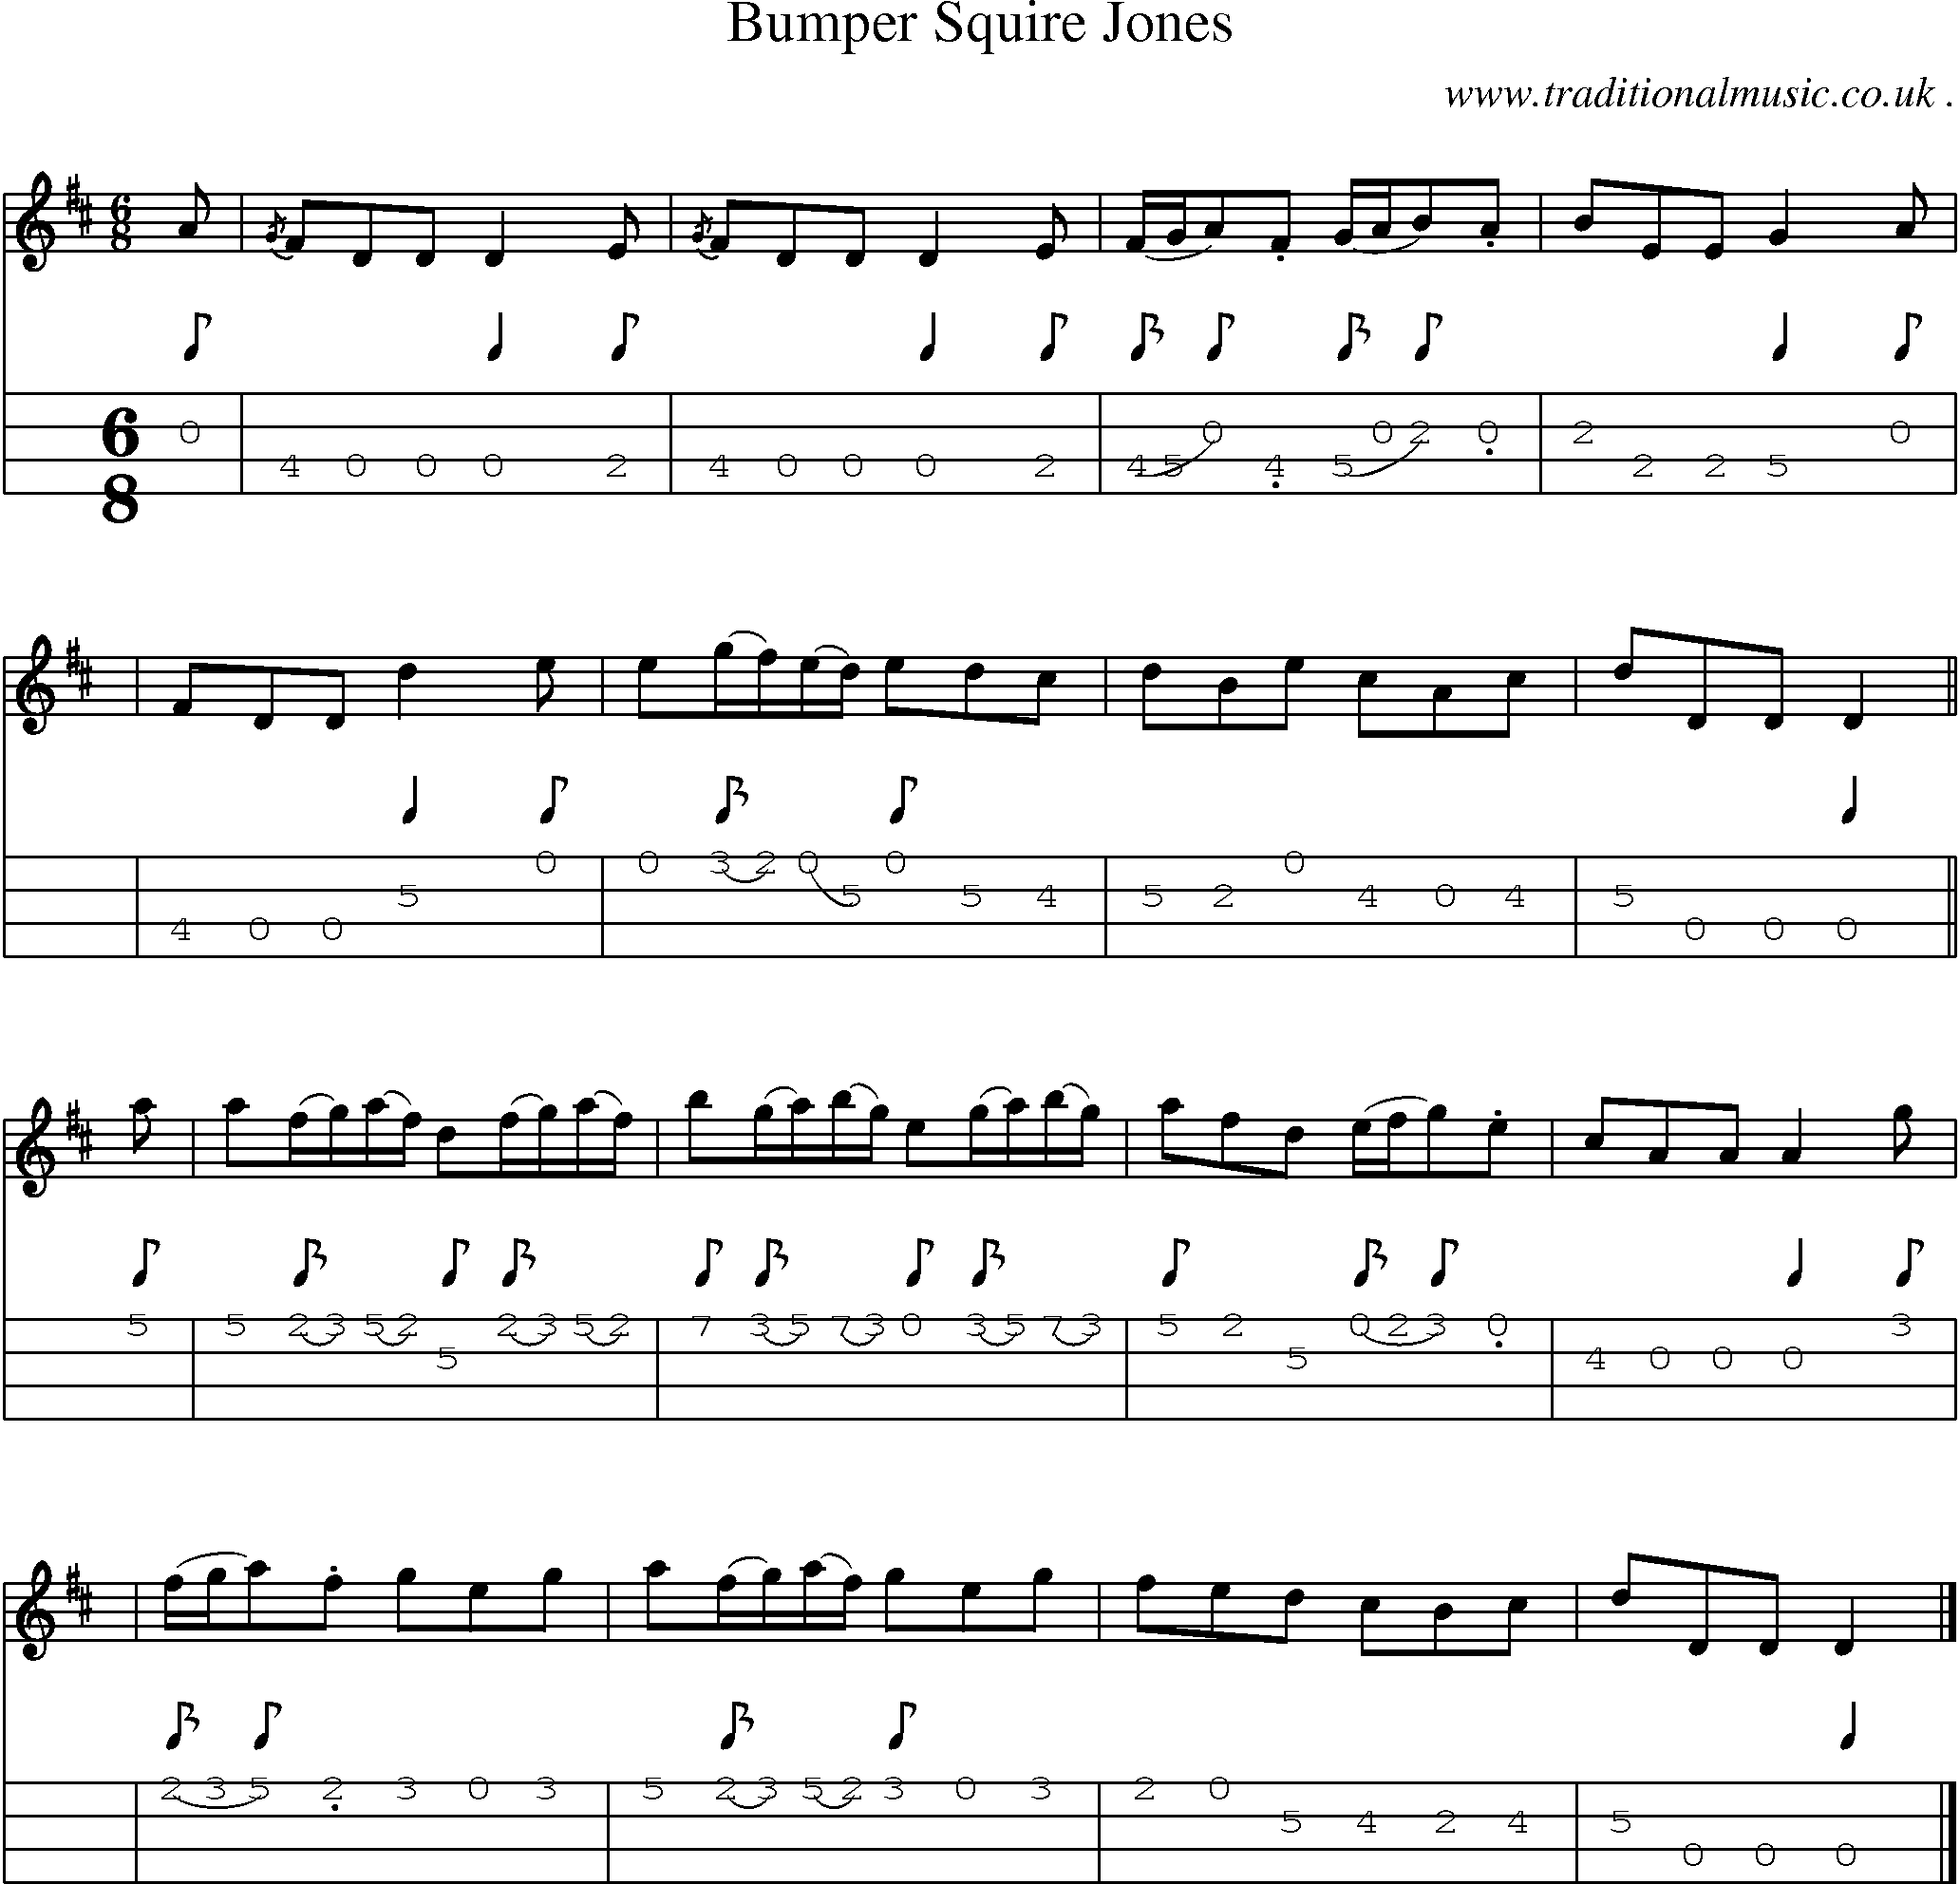 Sheet-music  score, Chords and Mandolin Tabs for Bumper Squire Jones